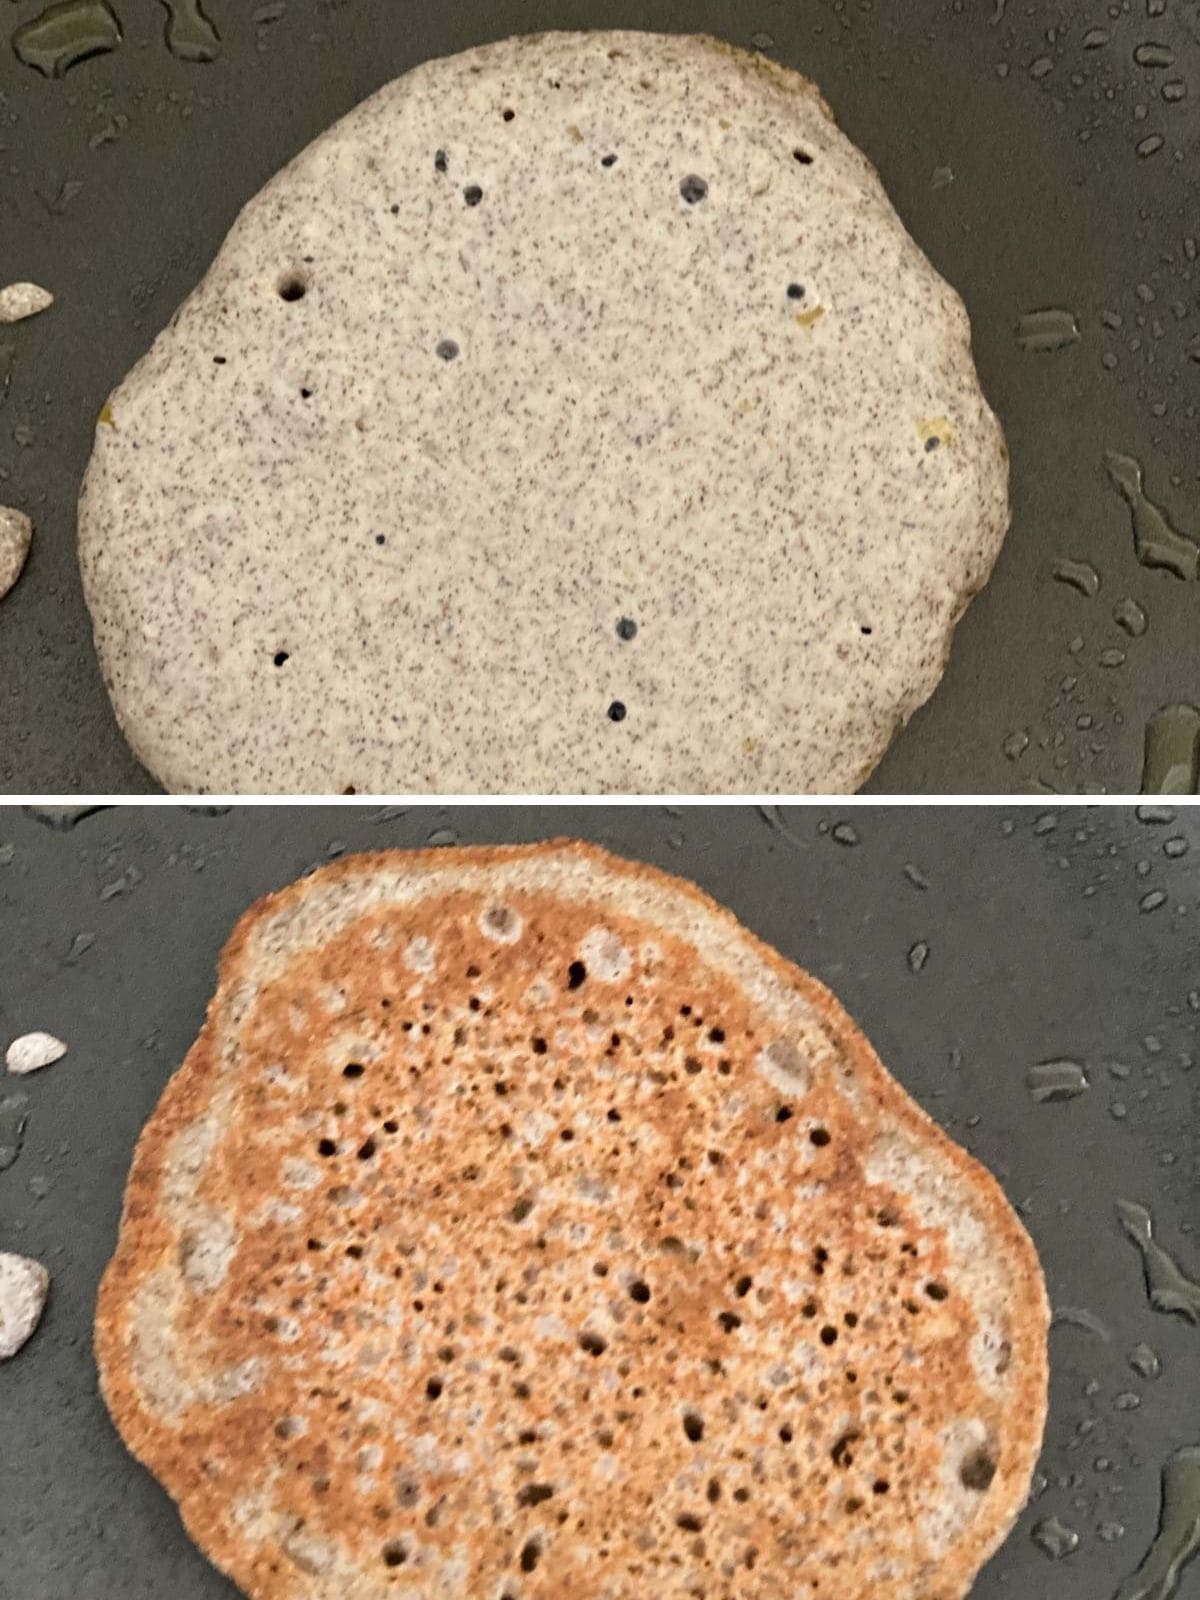 Showing bubbles in the batter and when to flip the pancake.